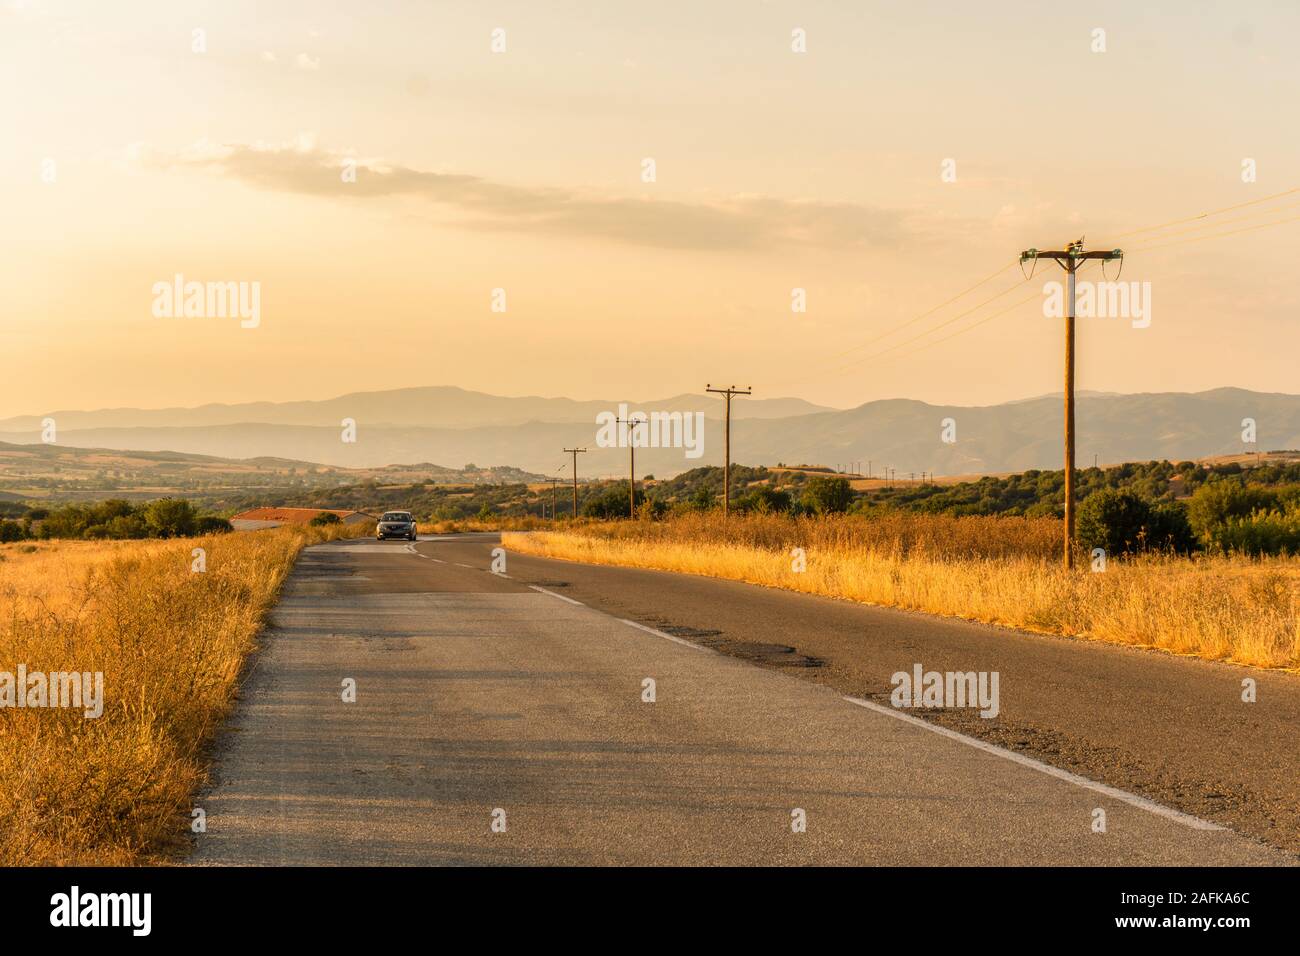 Car on the road and fields in Greece horizontal Stock Photo